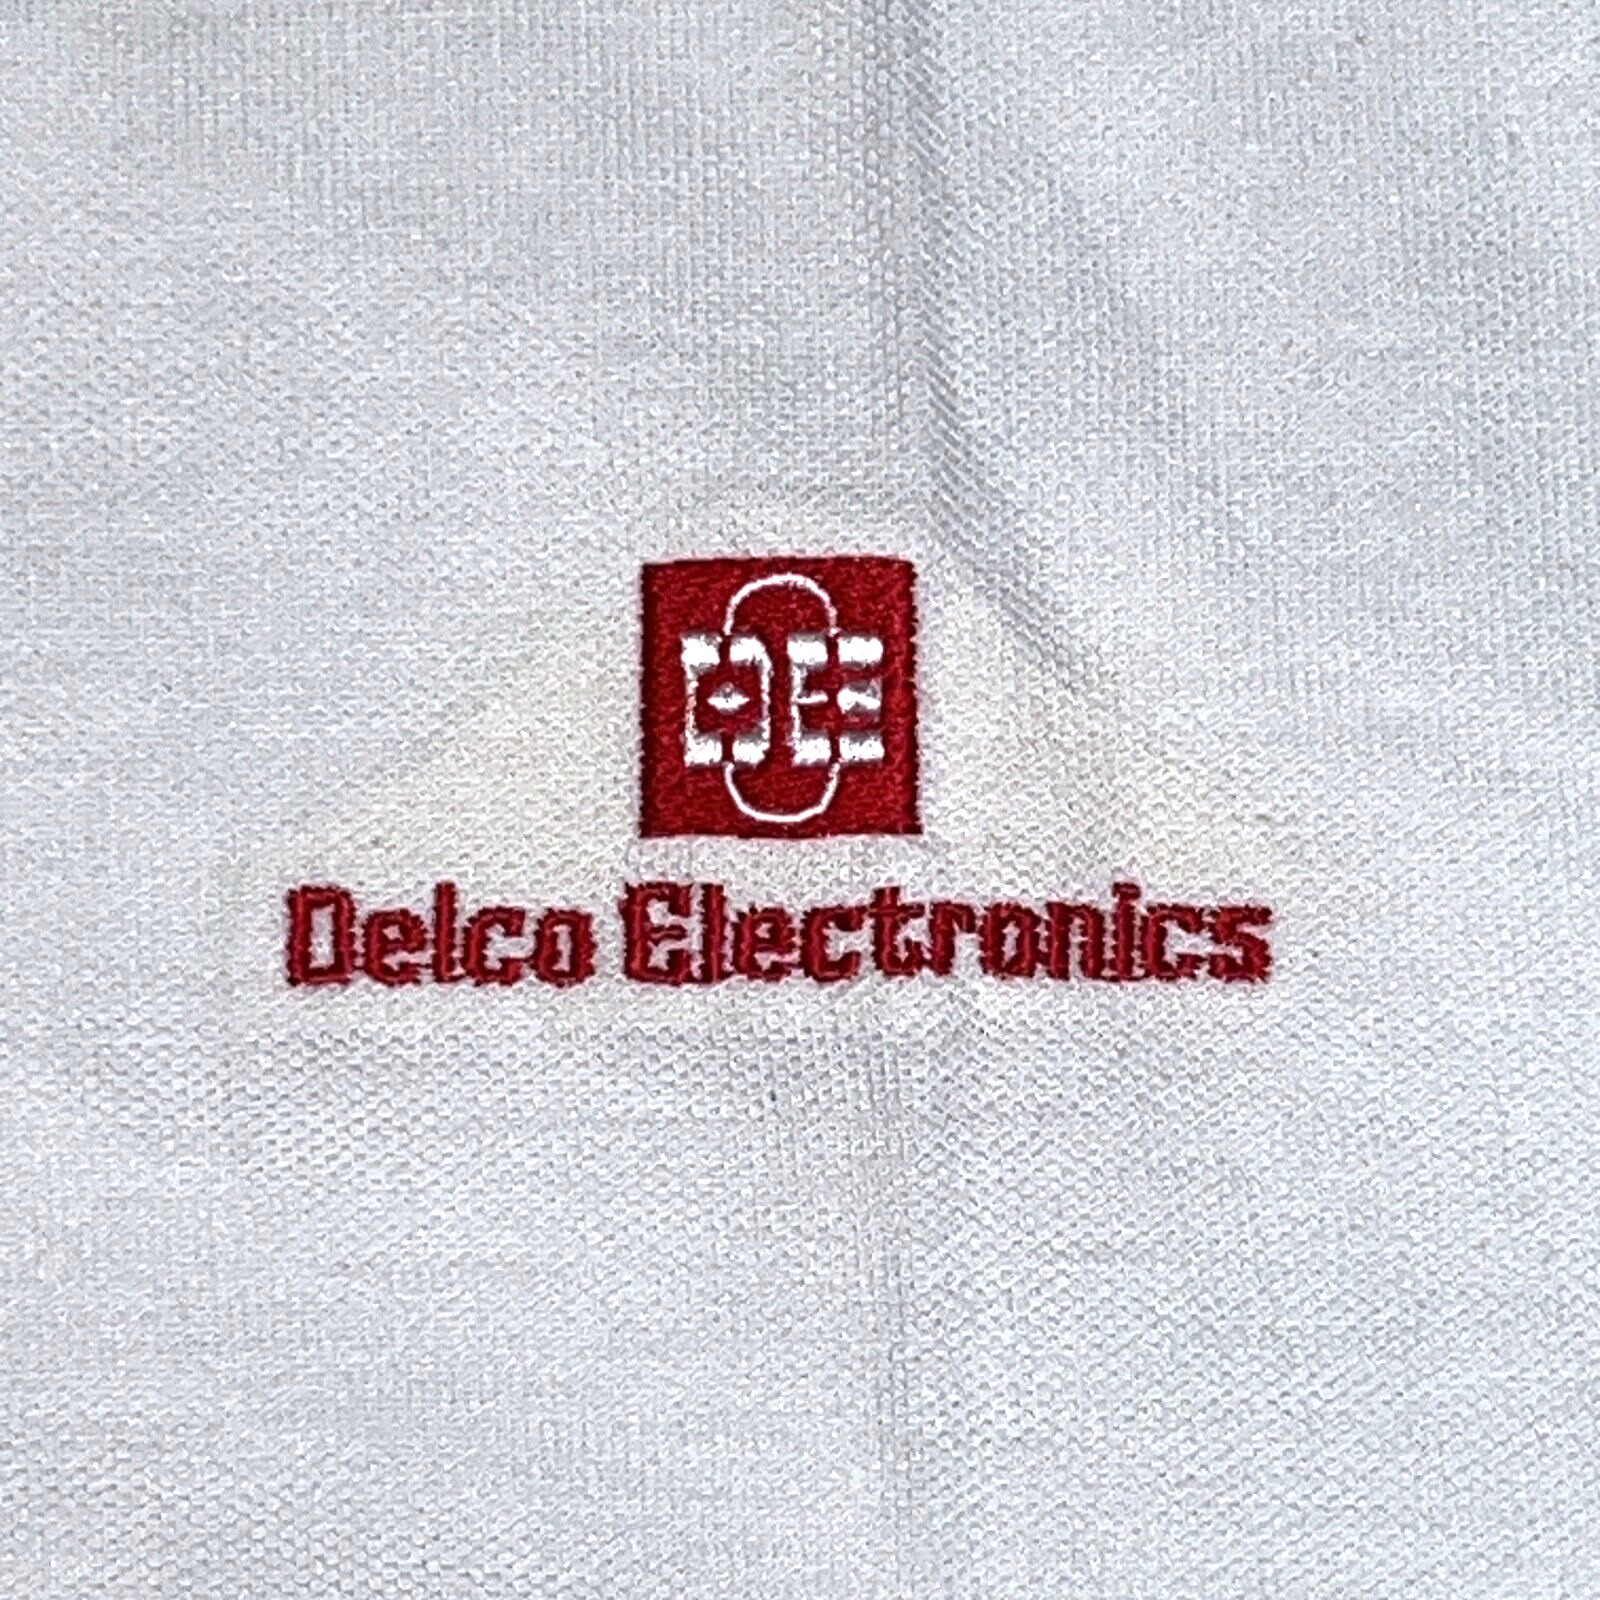 Delco Electronics Polo Shirt GM General Motors Auto Car Embroidered White Size L